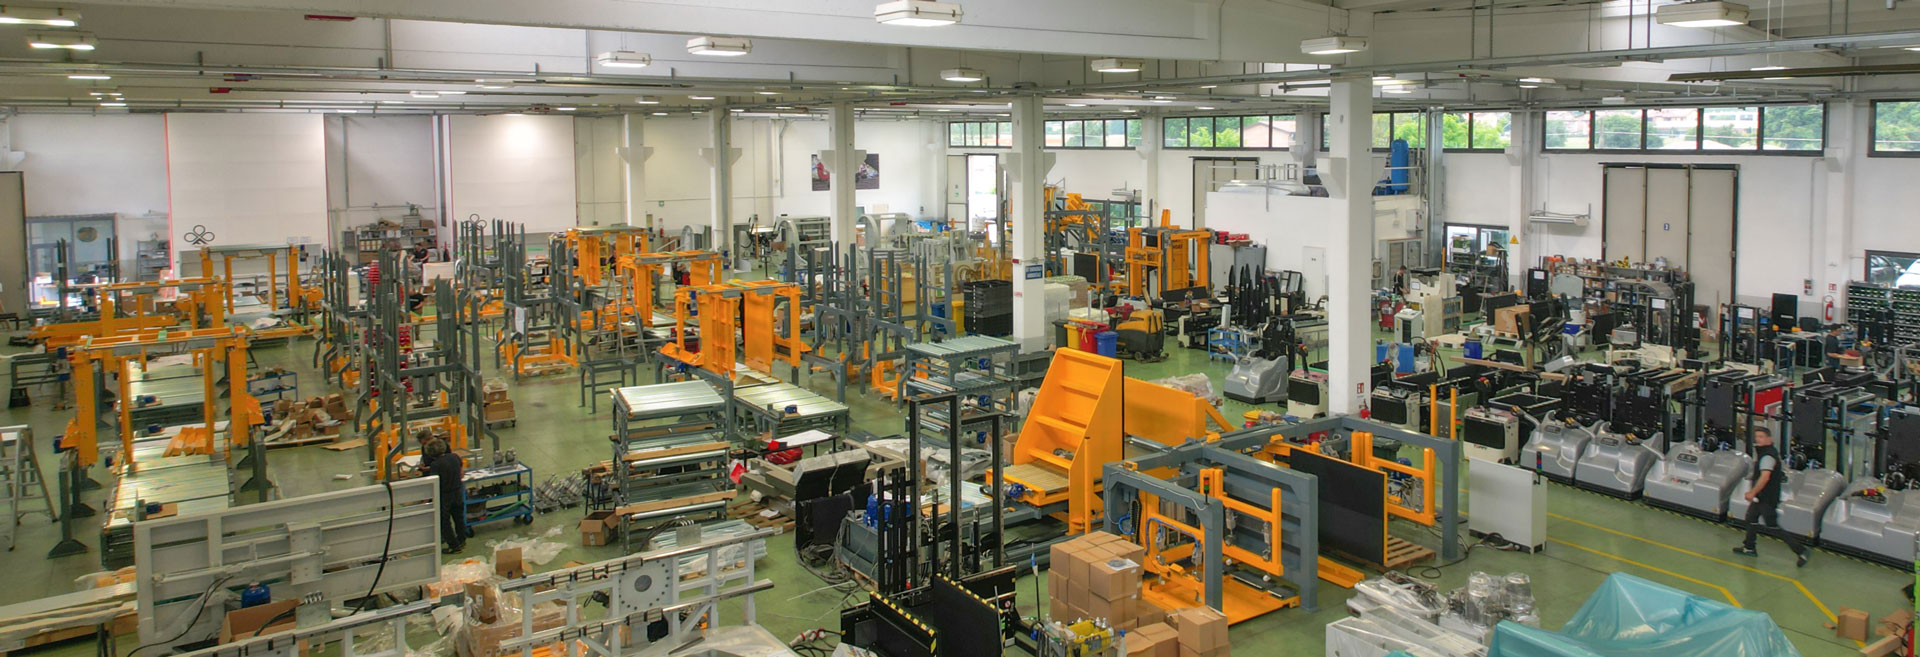 An image depicting a state-of-the-art pallet changer factory in operation